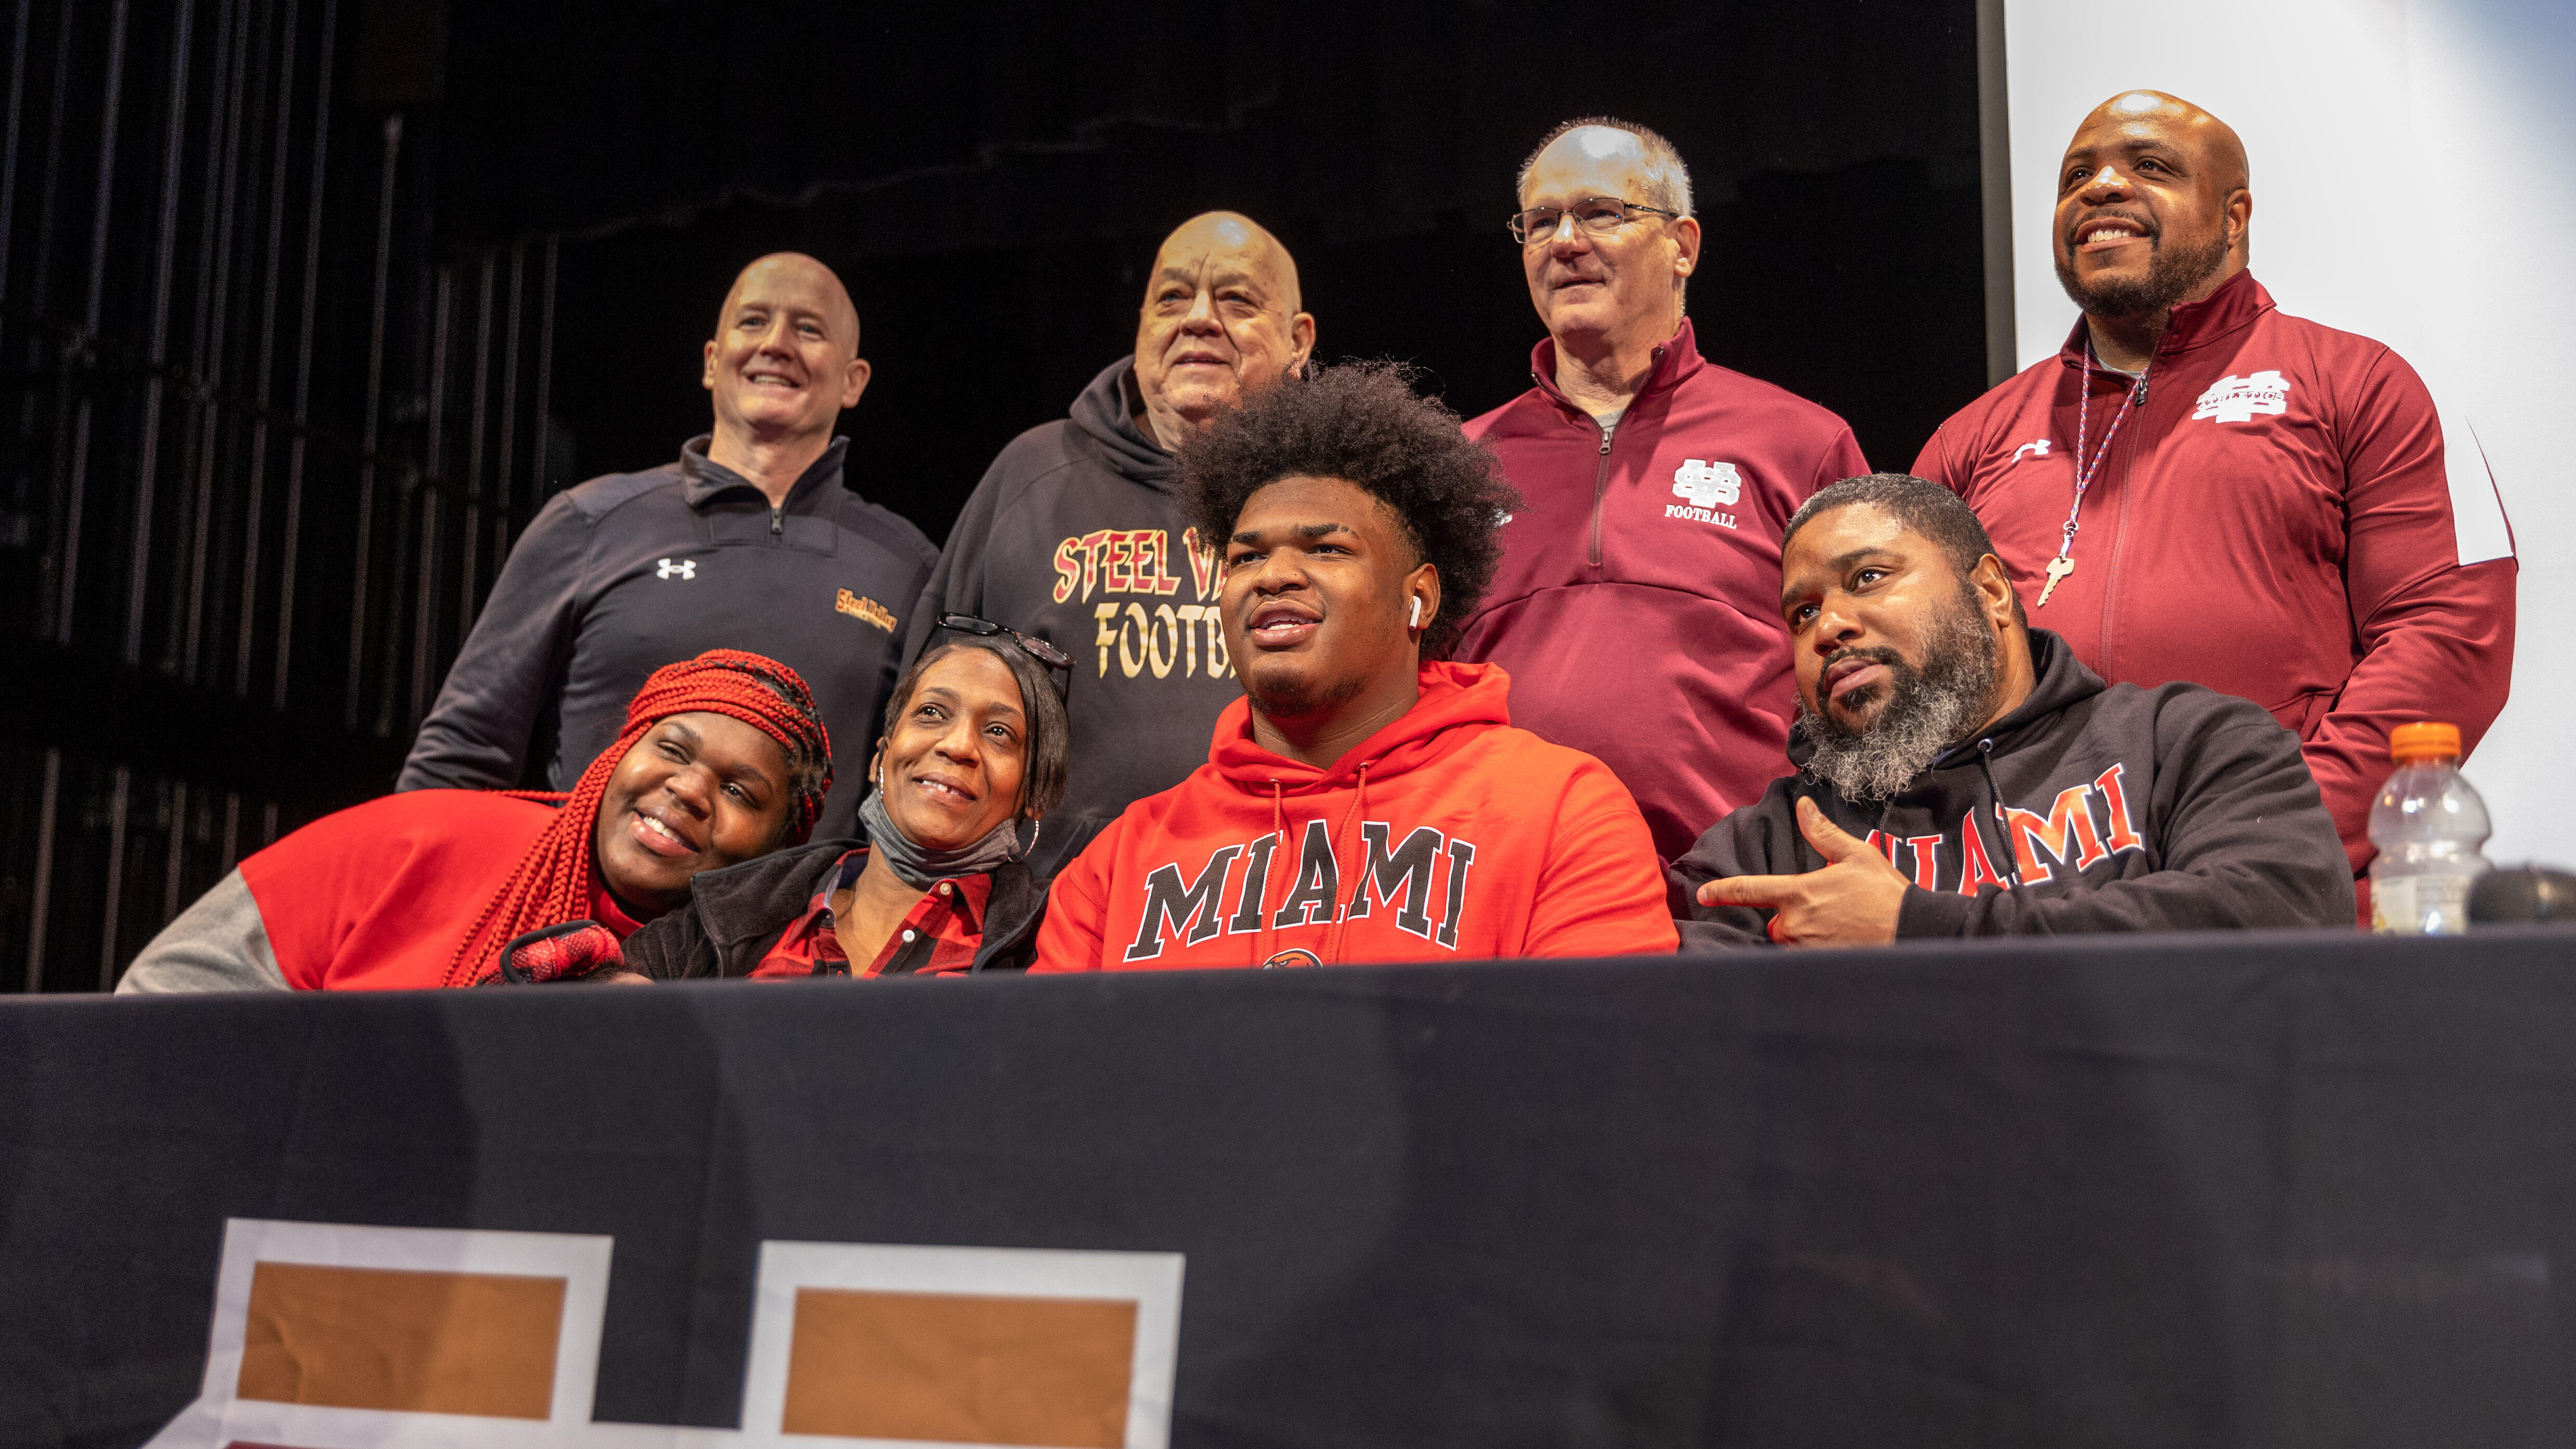 Greg Smith poses for a photo with his family and coaches. He is seated at a table on a stage.